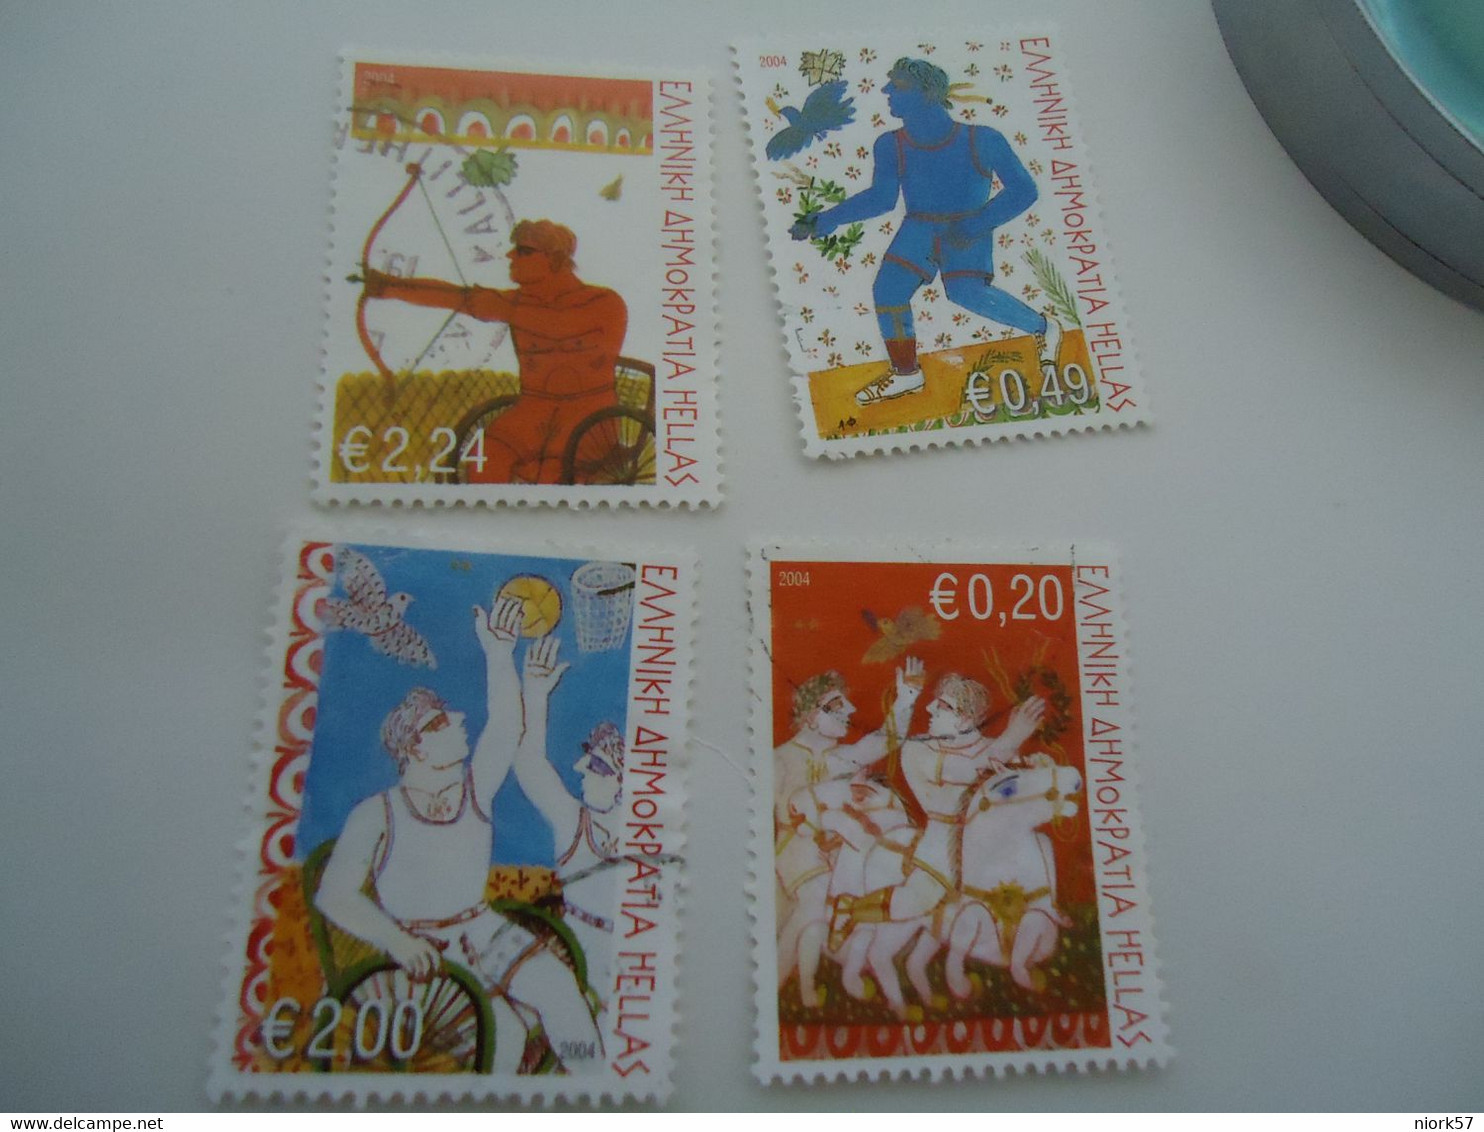 GREECE USED STAMPS SET 4 OLYMPIG GAMES ATHENS 2004 POWER OF WILL - Sommer 2004: Athen - Paralympics